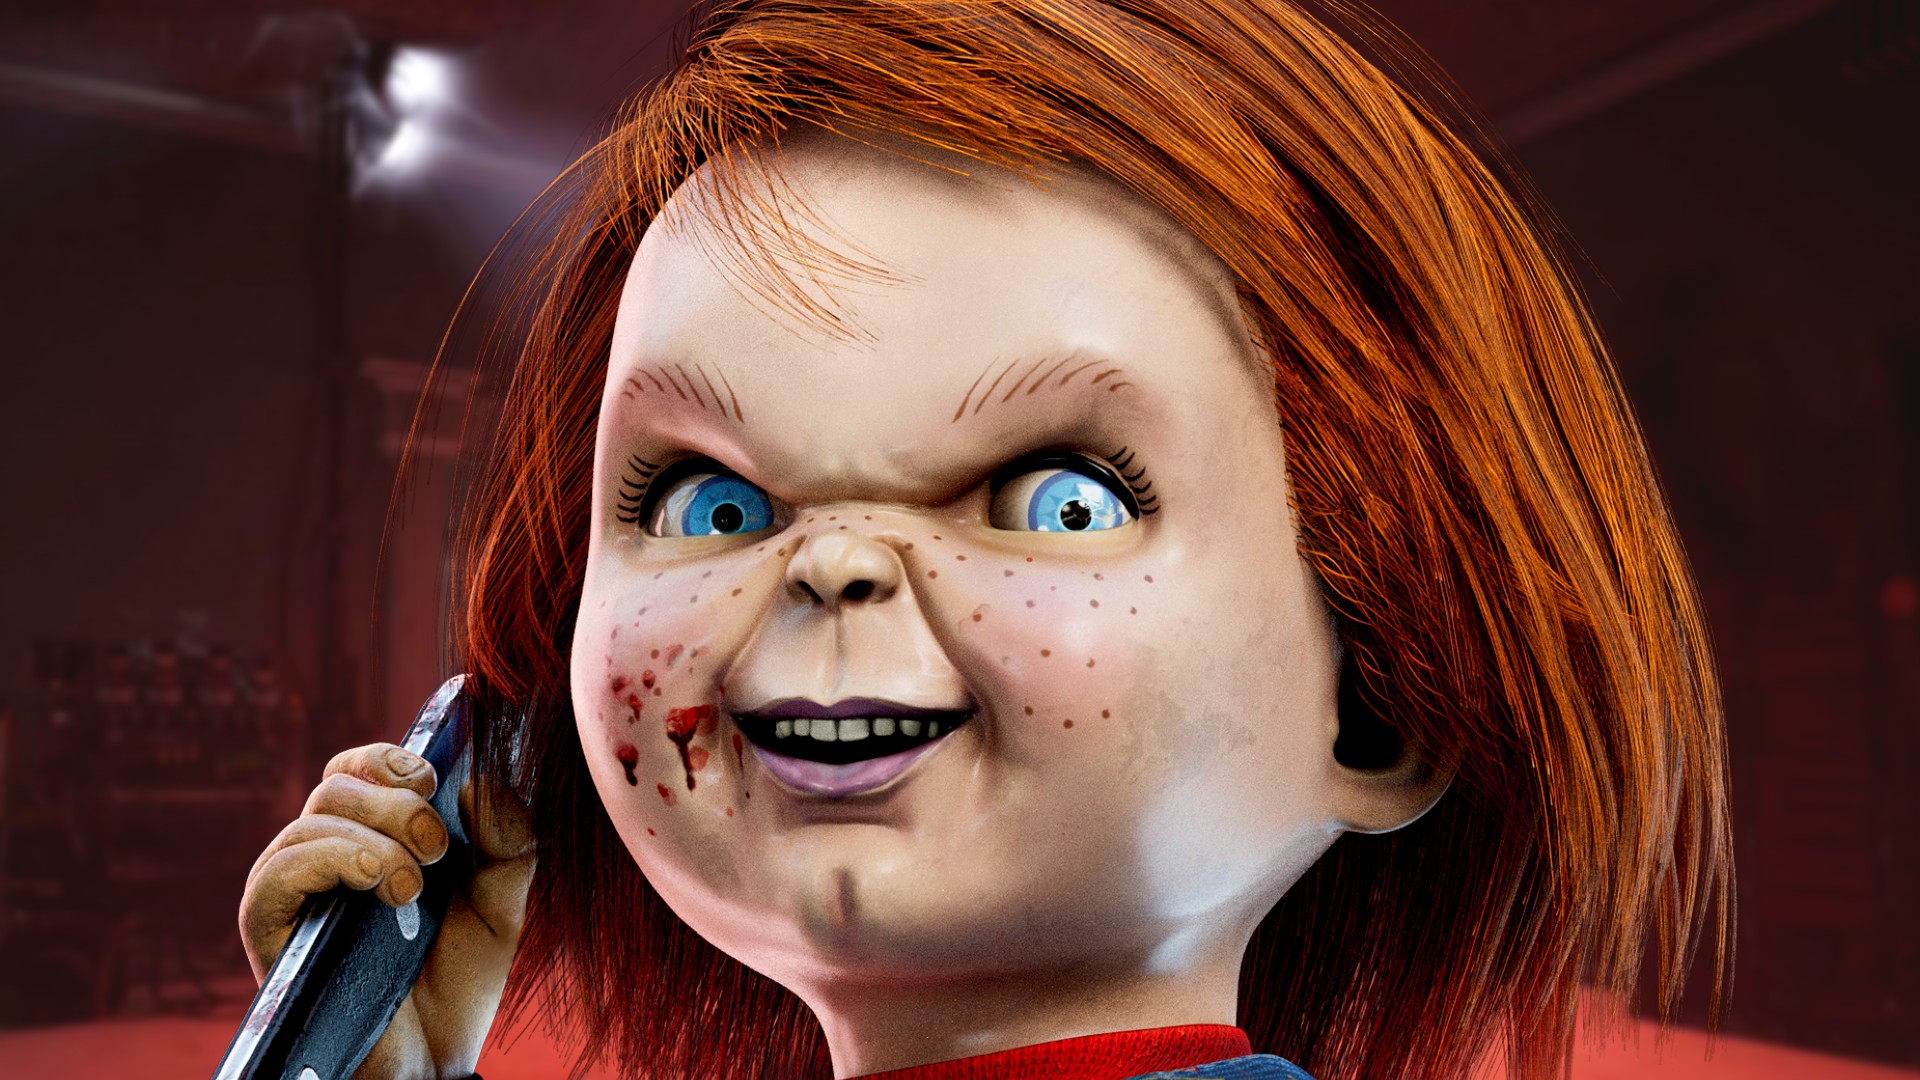 When does Chucky come to Dead by Daylight – Chapter 30 release time